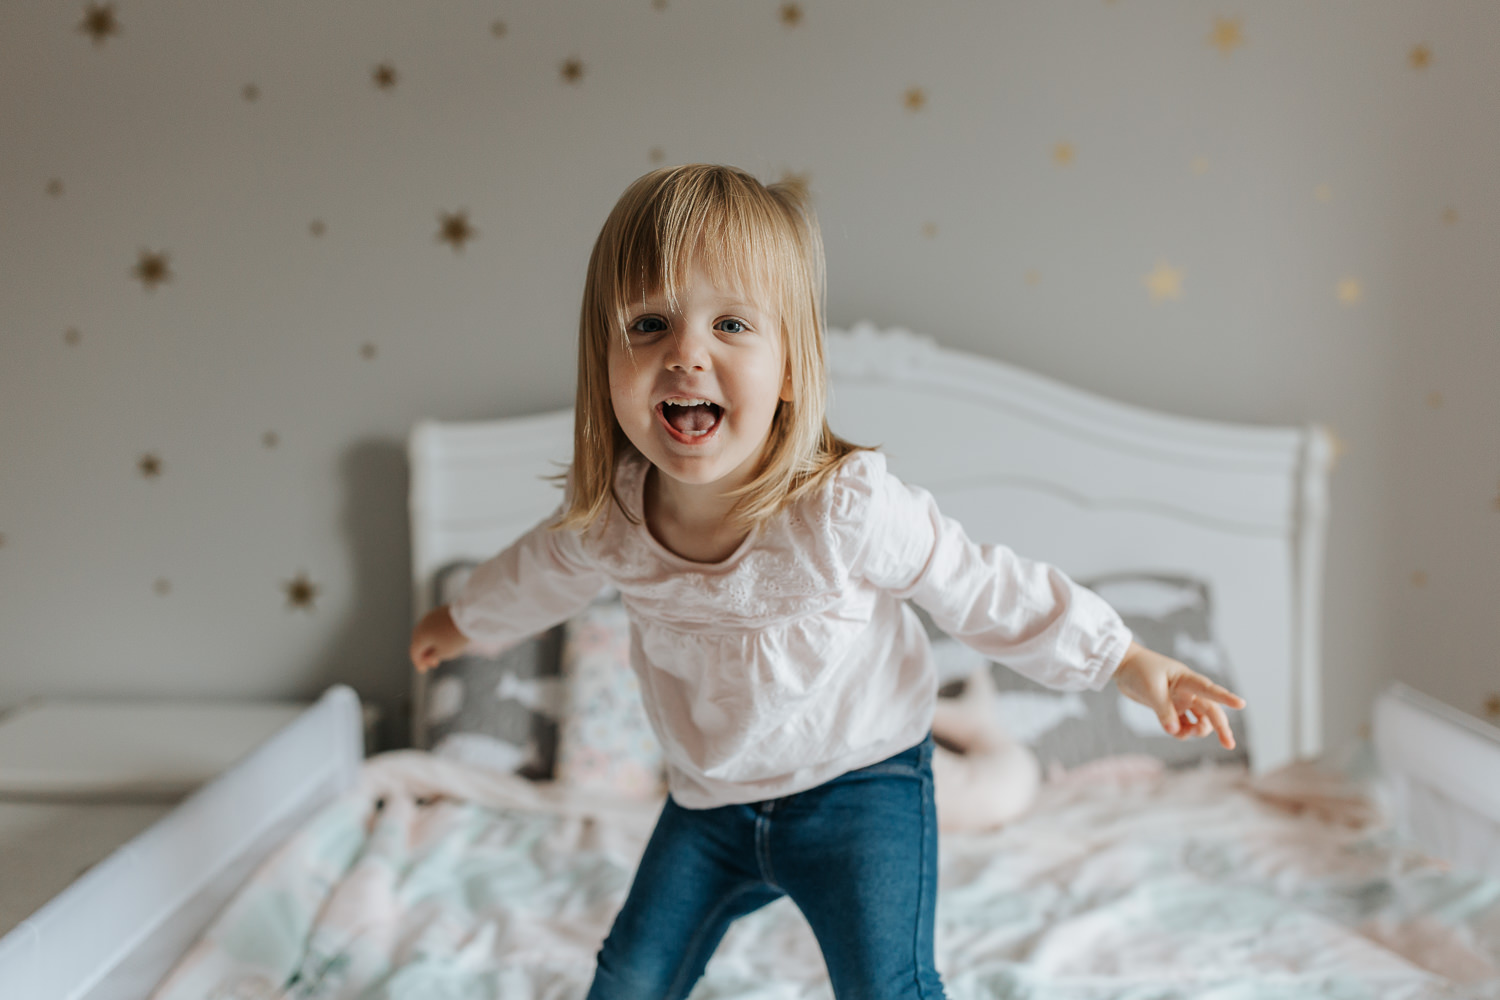 Stouffville In-Home Photography -blonde toddler girl jumping on bed with gold star decals on her wall, toddler bed, happy